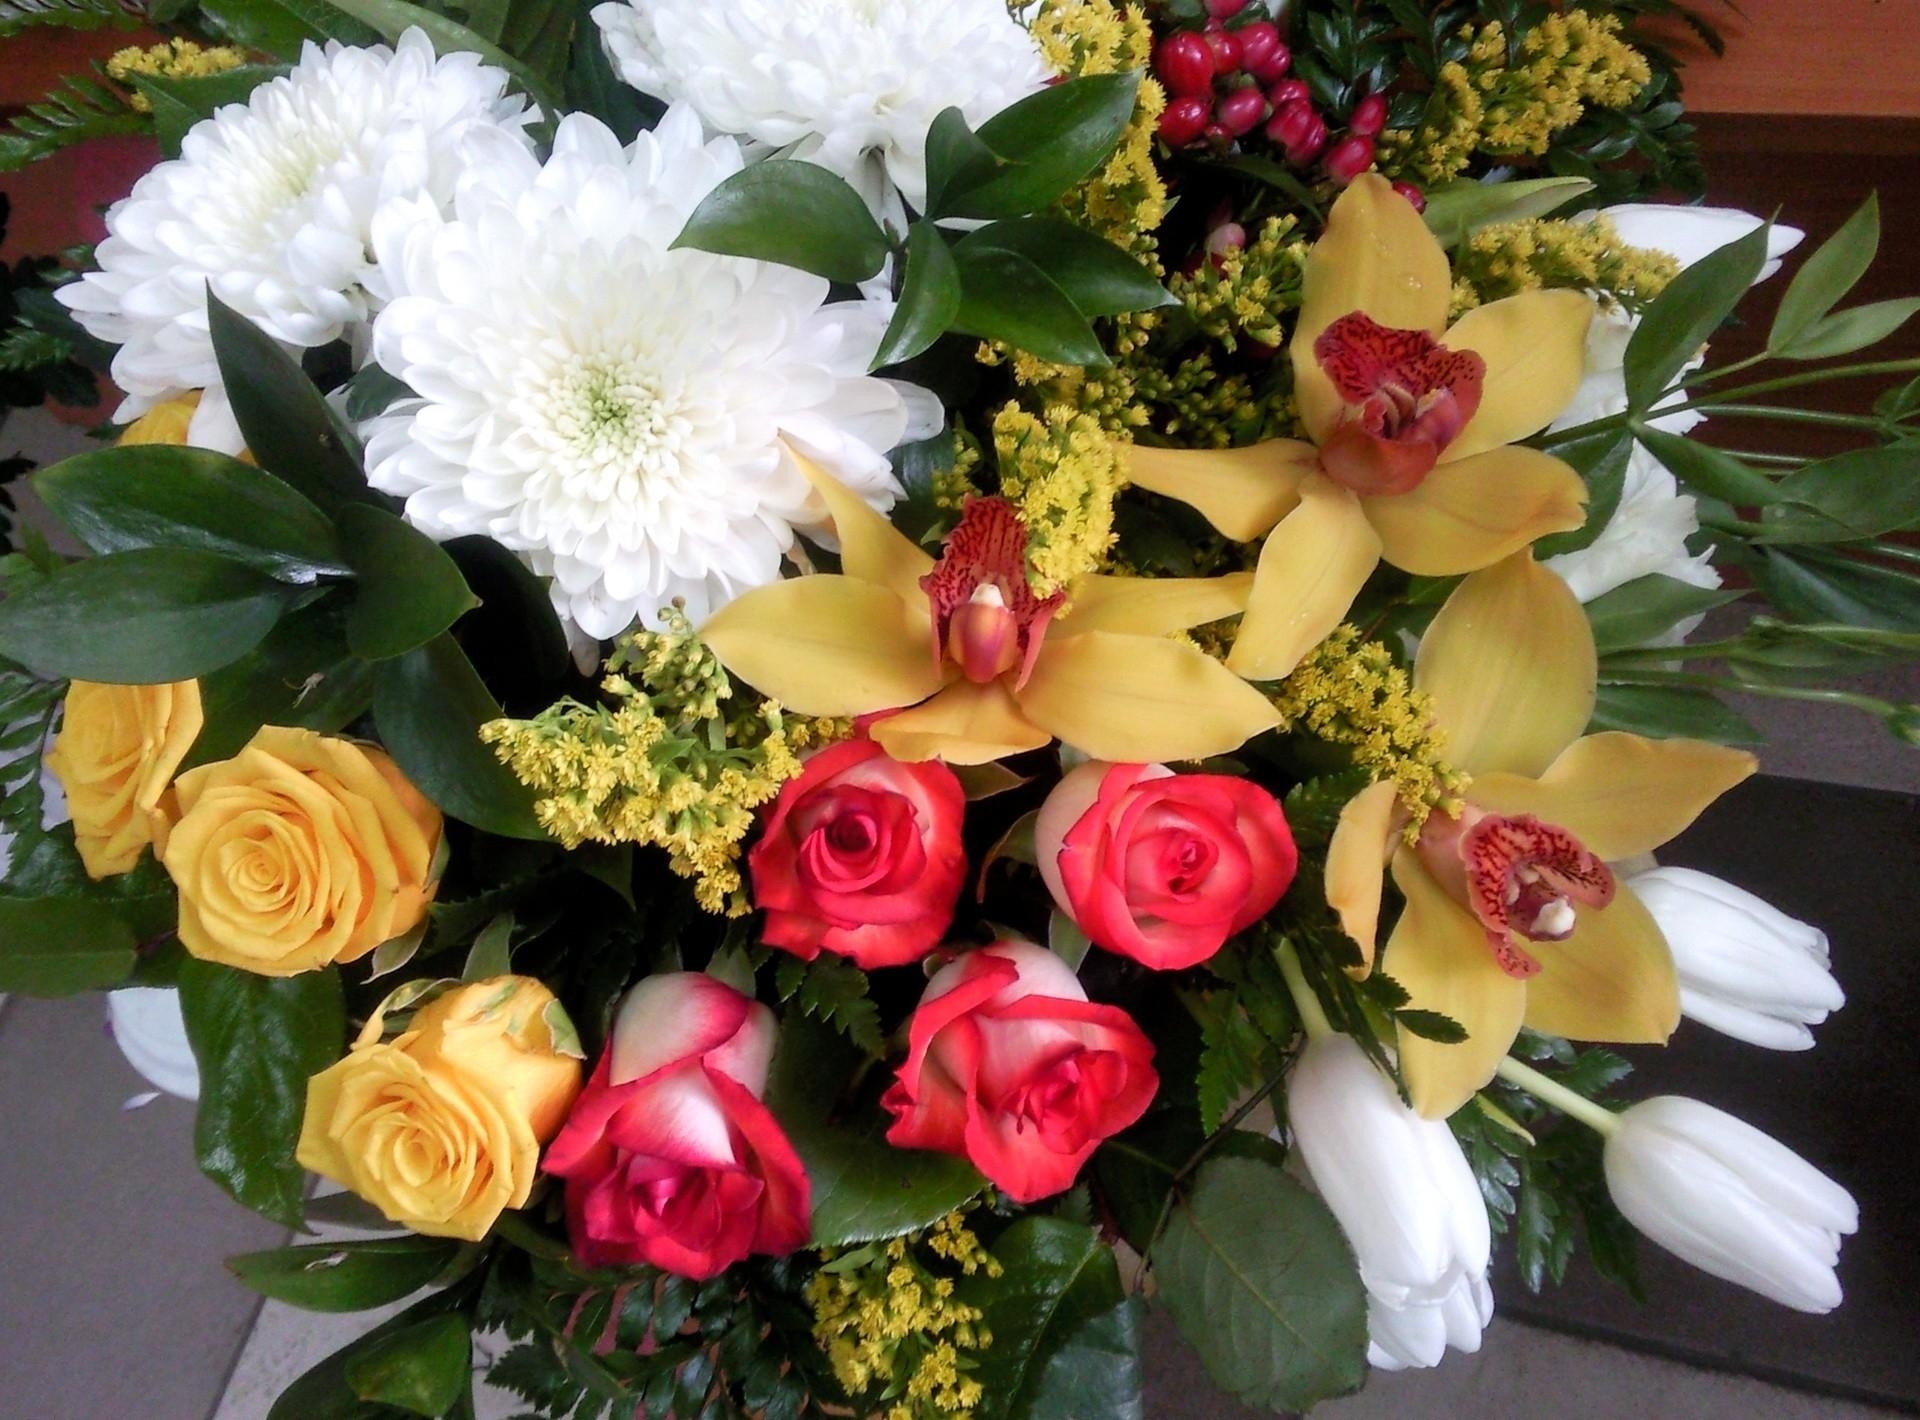 flowers, roses, tulips, chrysanthemum, greens, bouquet, orchids, handsomely, it's beautiful